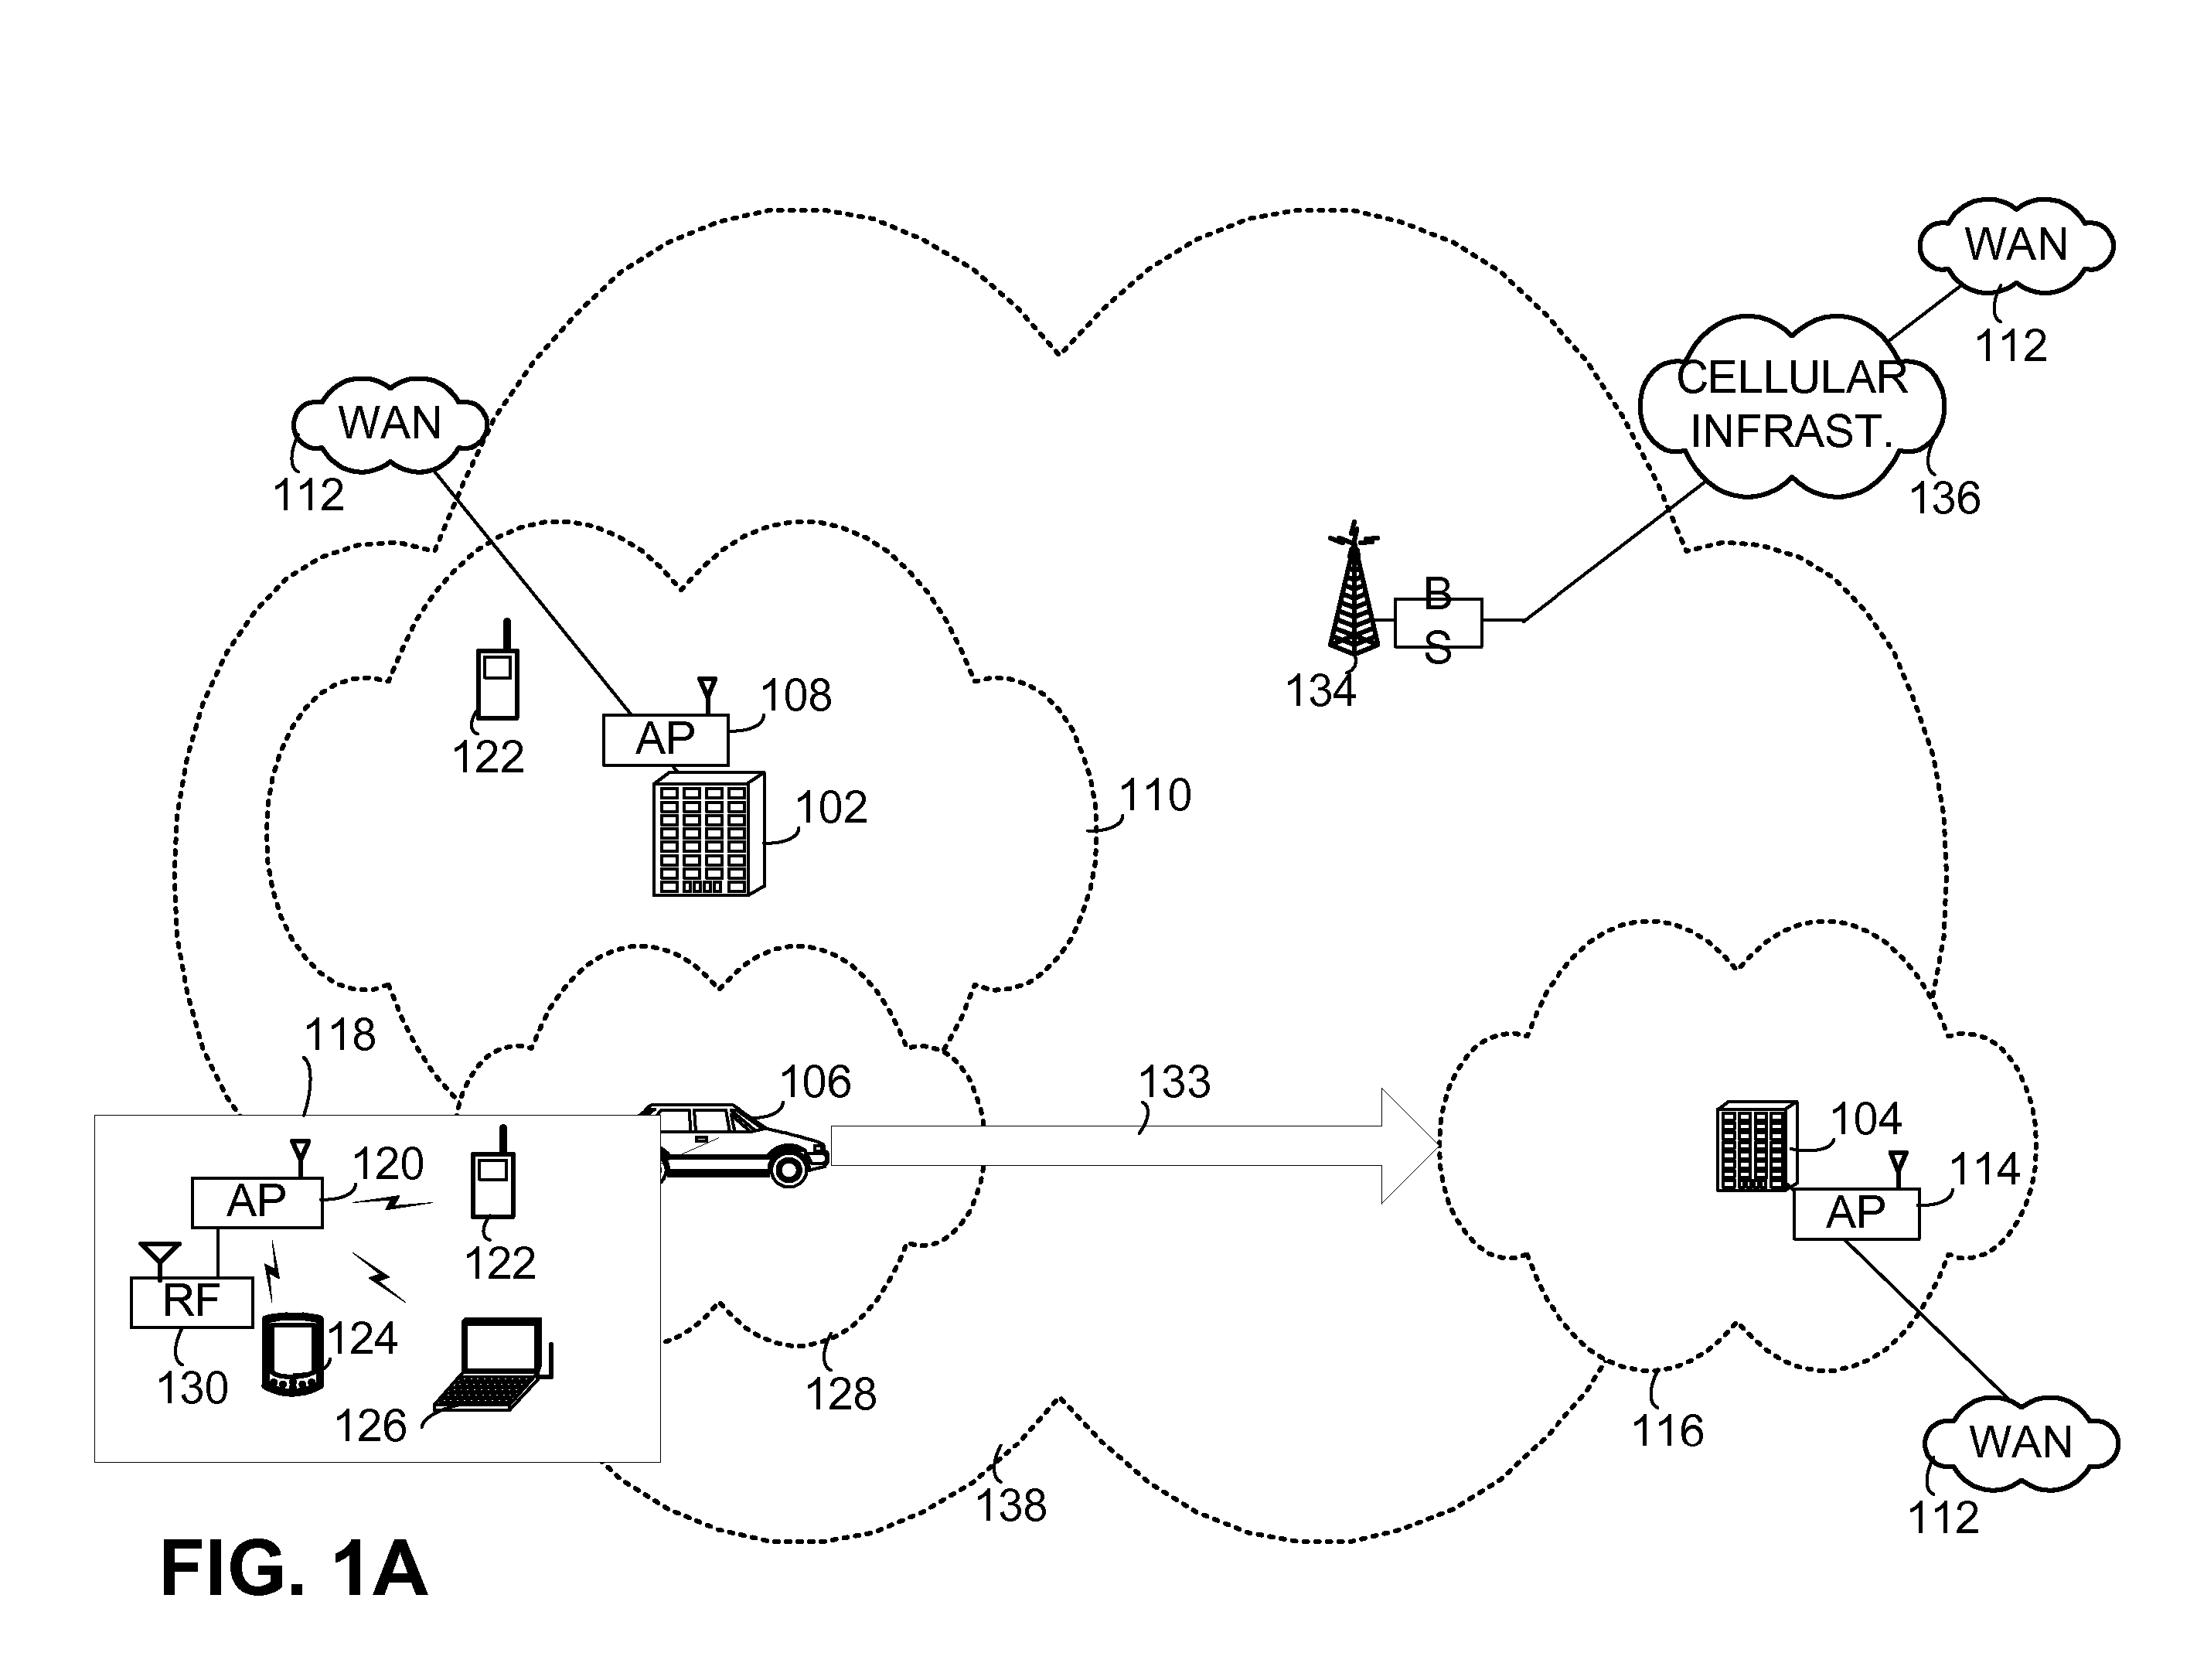 System and method for servicing communications using both fixed and mobile wireless networks